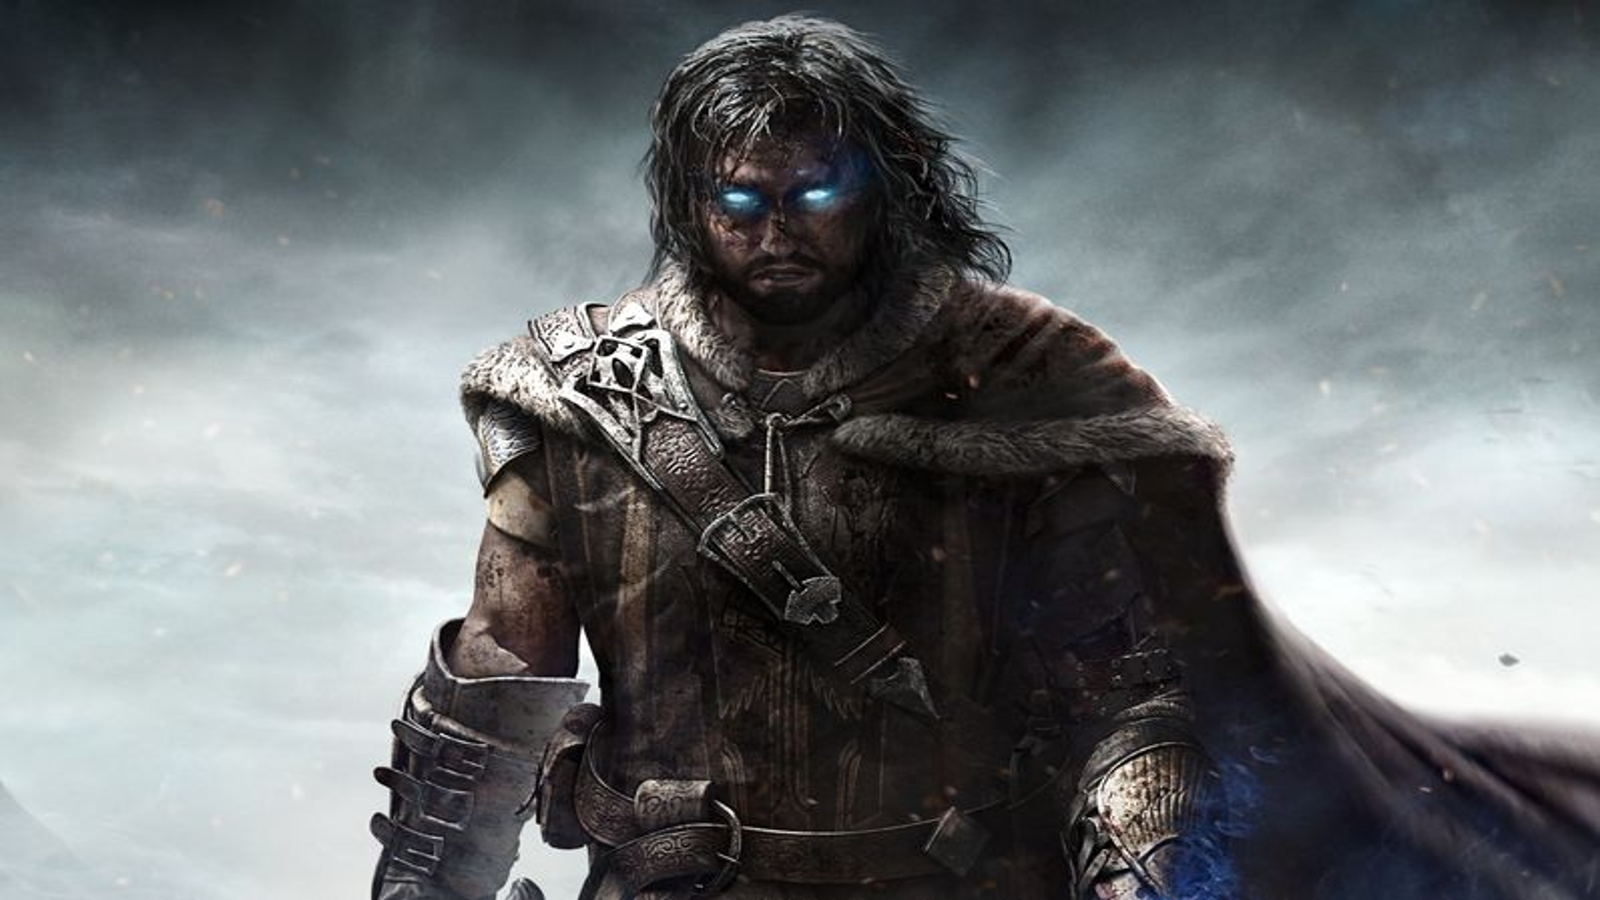 Shadow of Mordor: Who needs the Hobbit now?